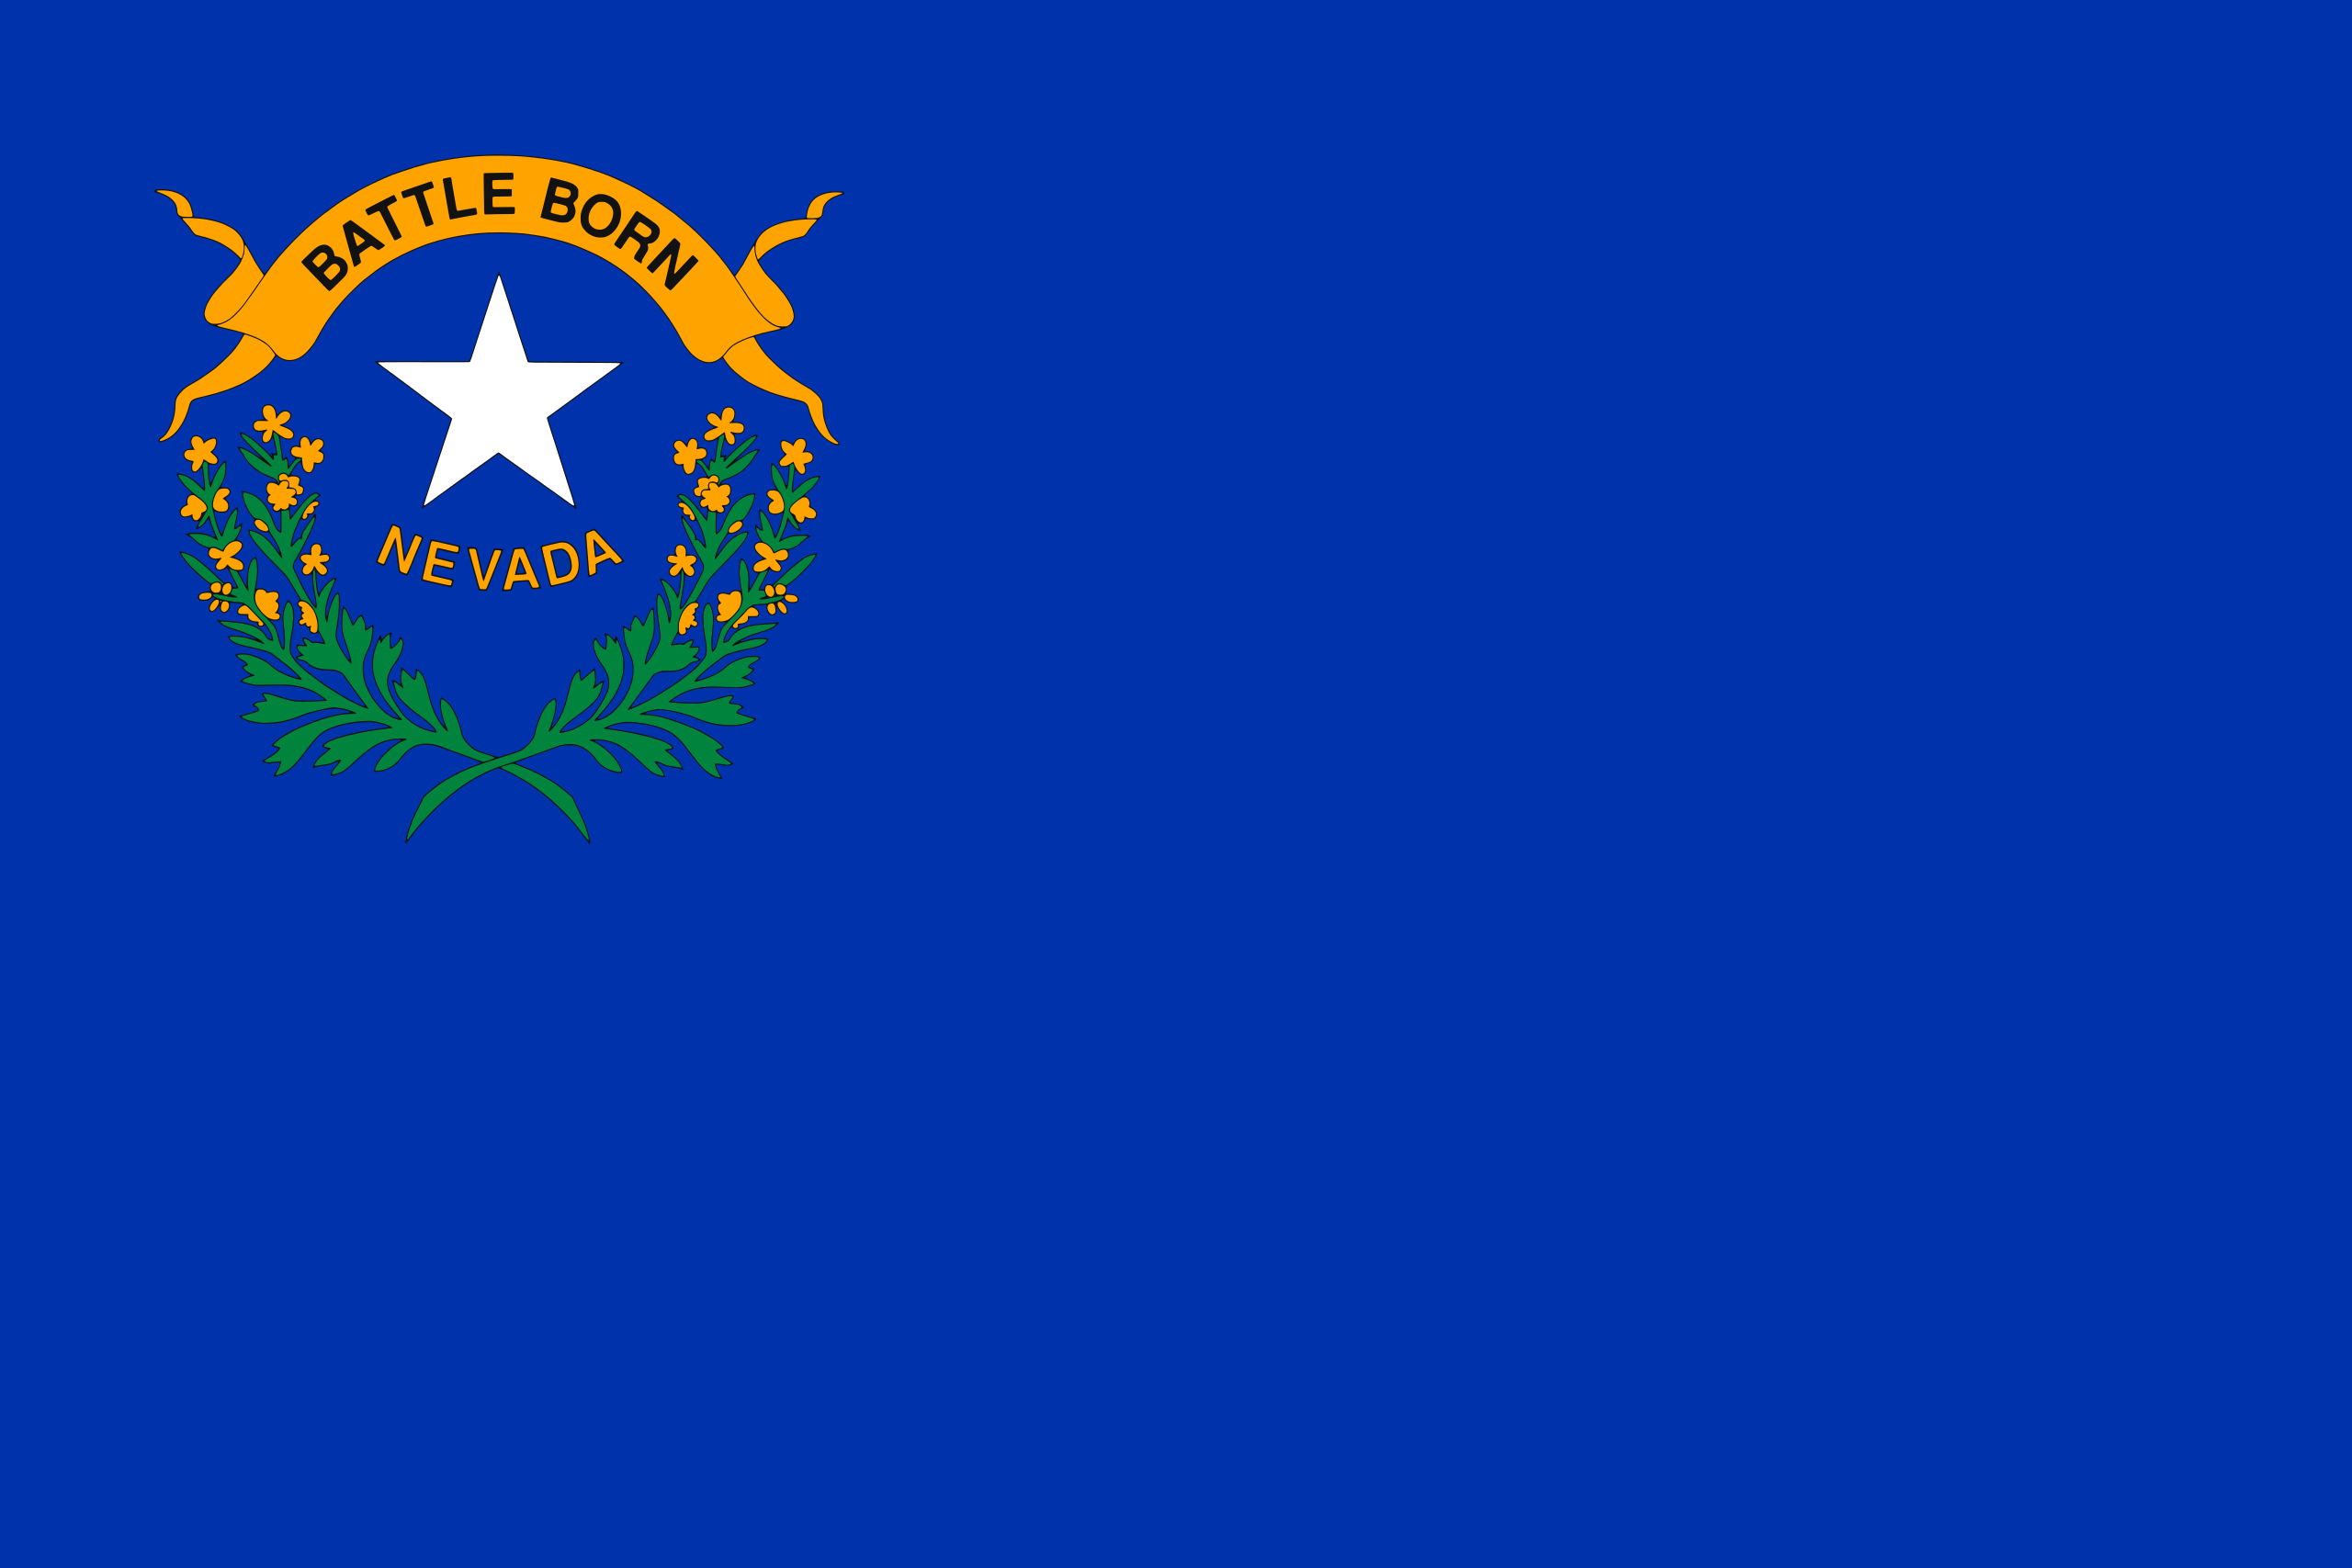 the Nevada state flag